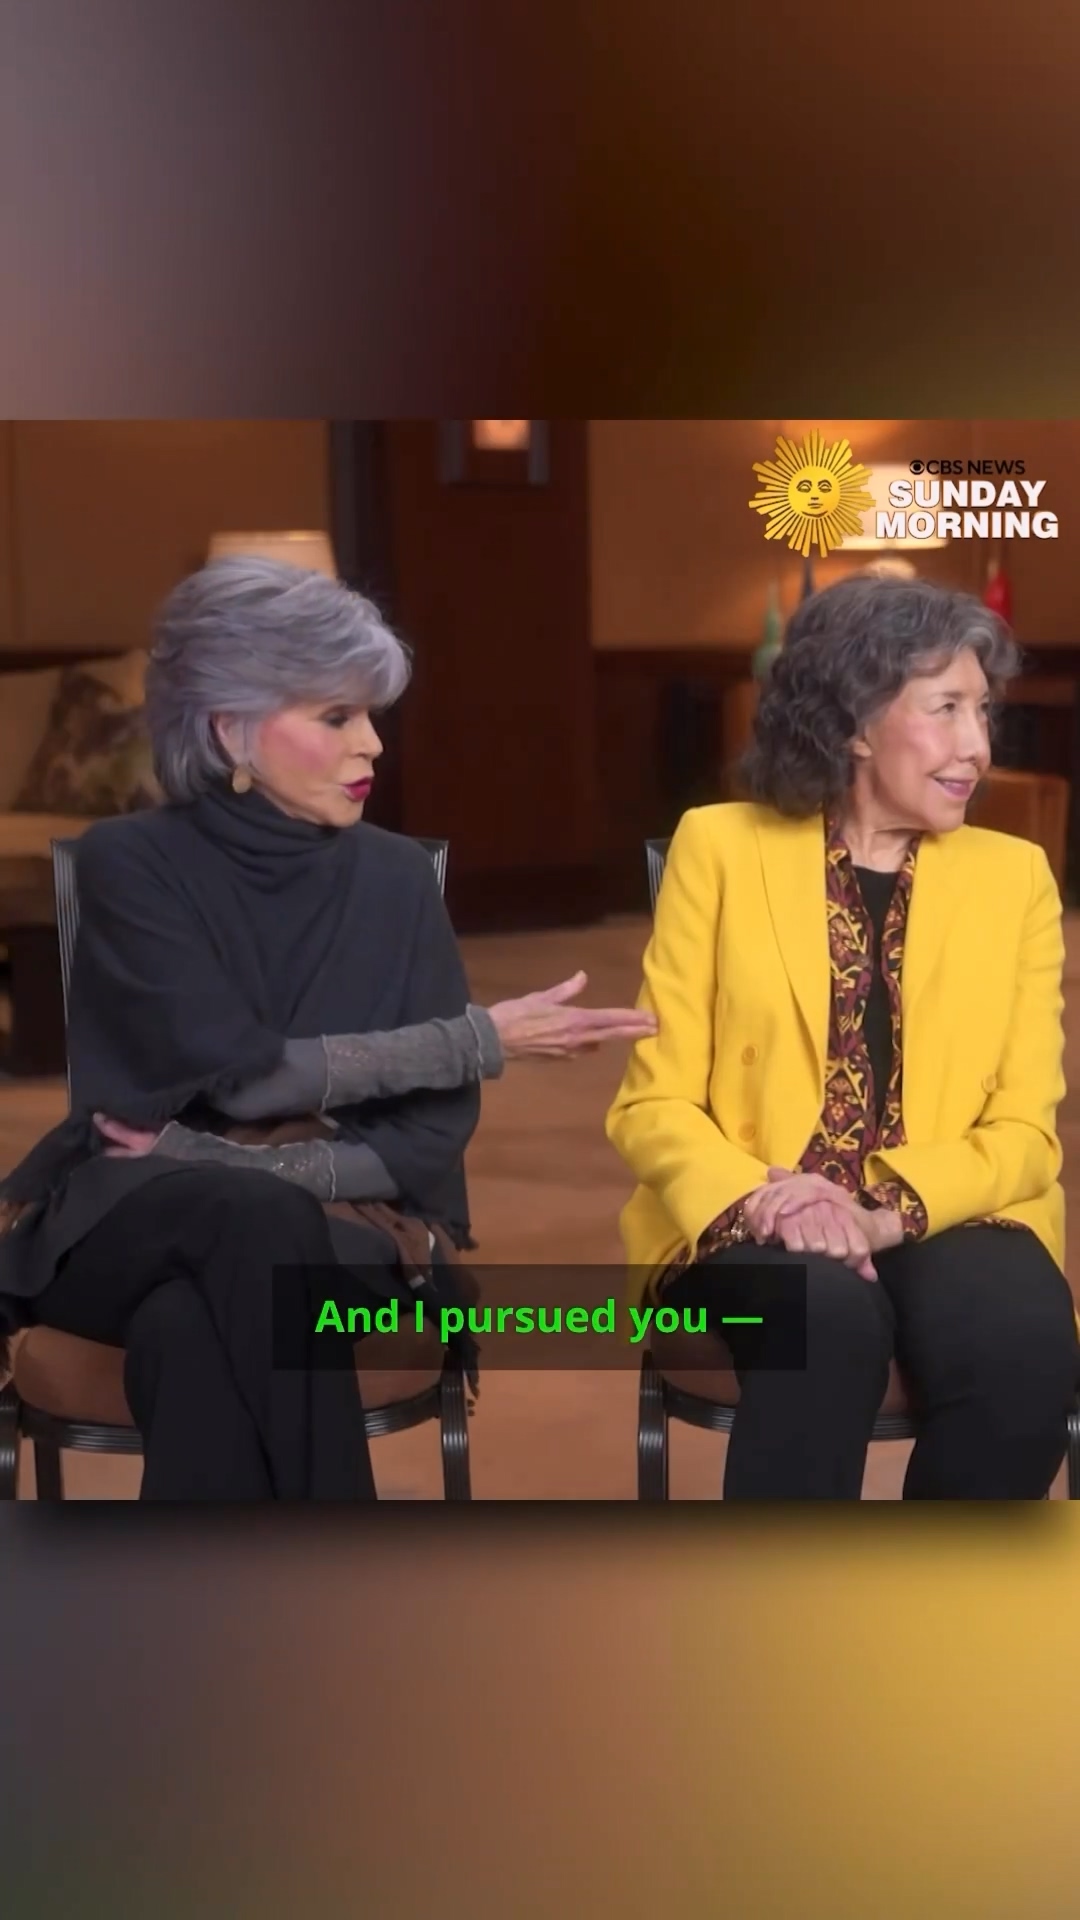 “You have to pursue people you want to be friends with.”@80forbrady actor @janefonda explains how she sought friendships with Sa_20230314_134837.694.jpg